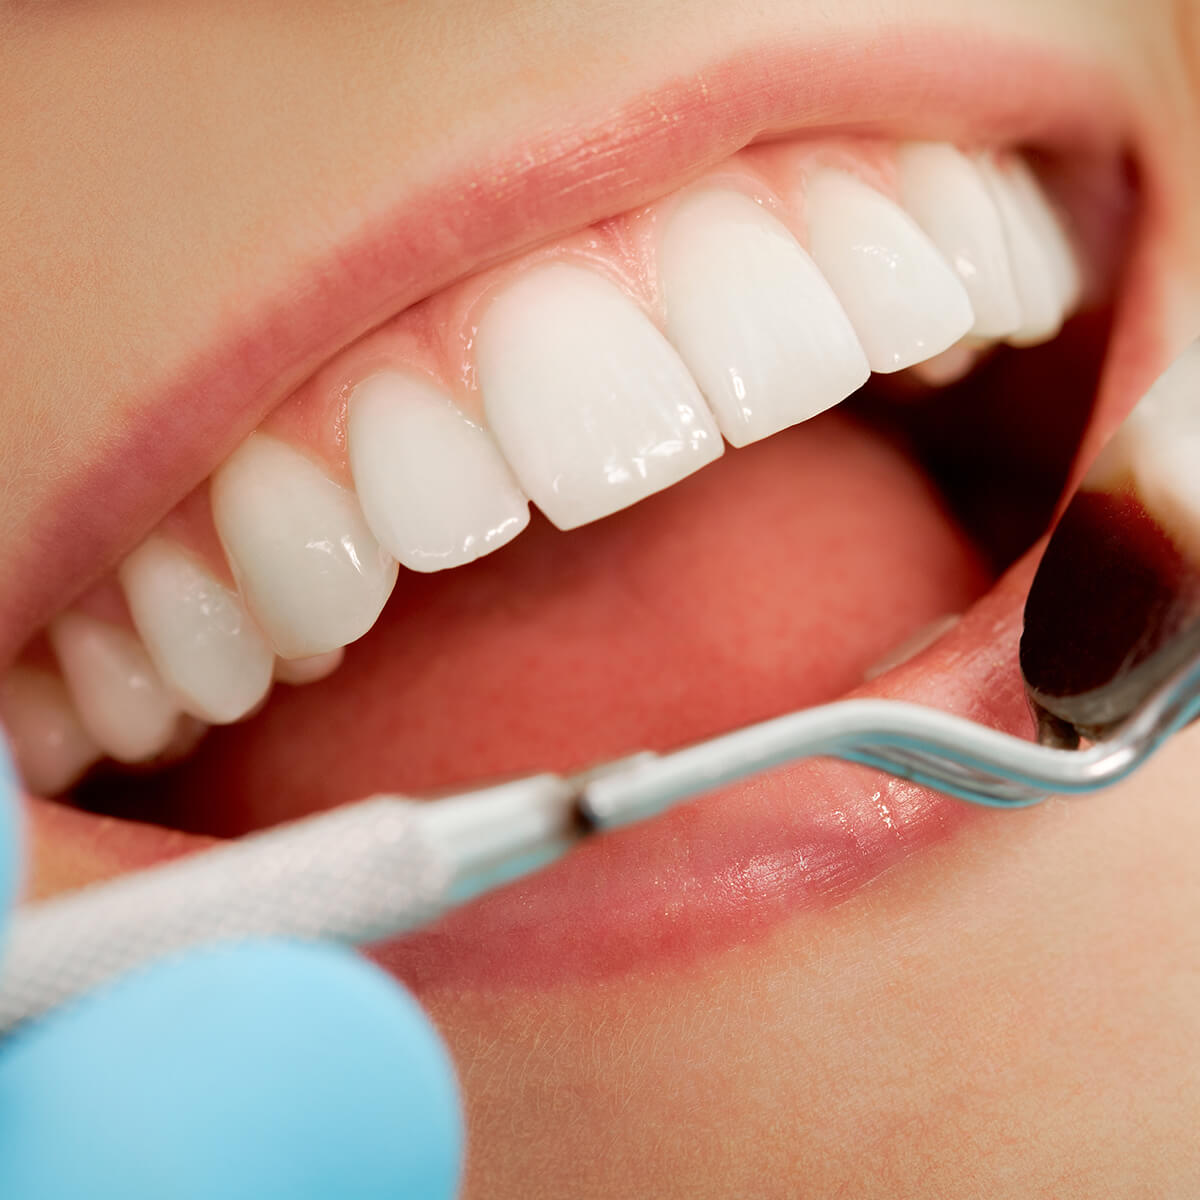 Why professional dental cleanings and checkups are important for your oral health